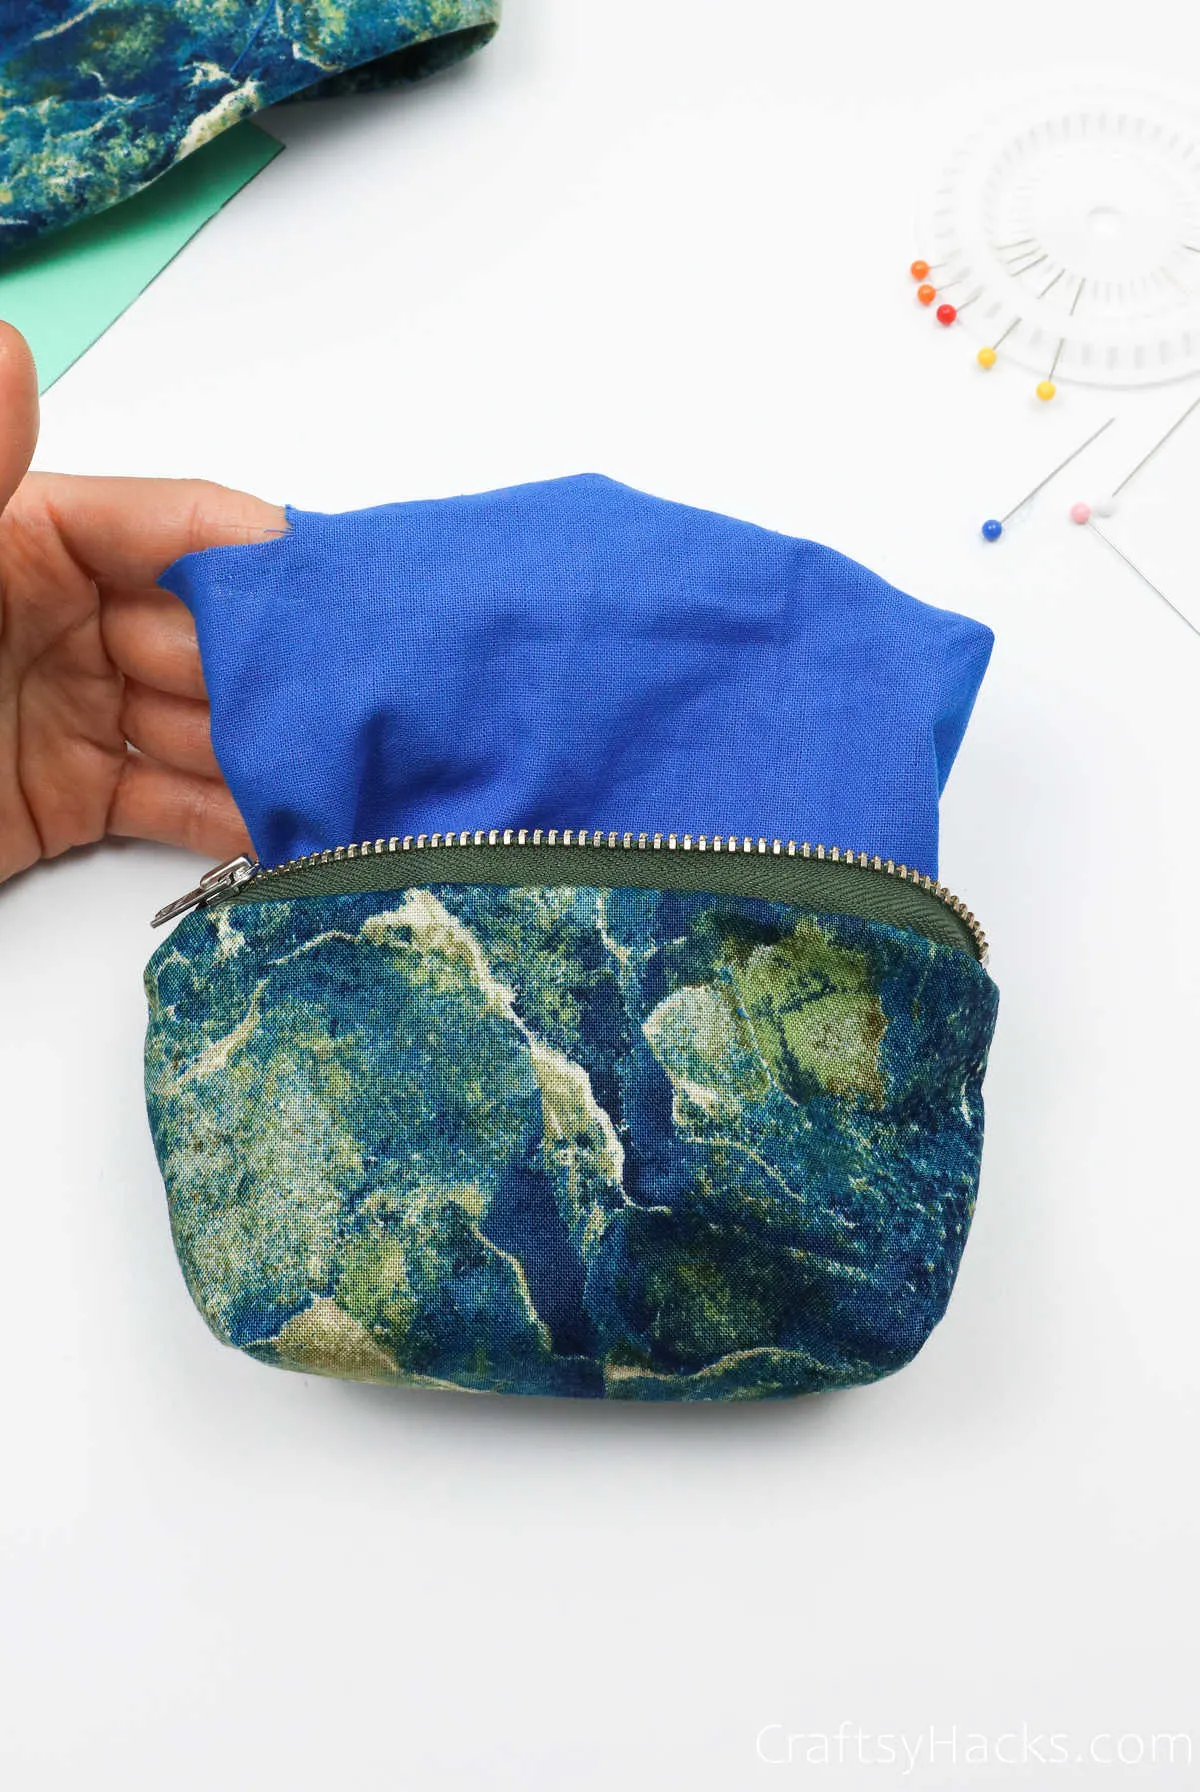 holding inside of pouch